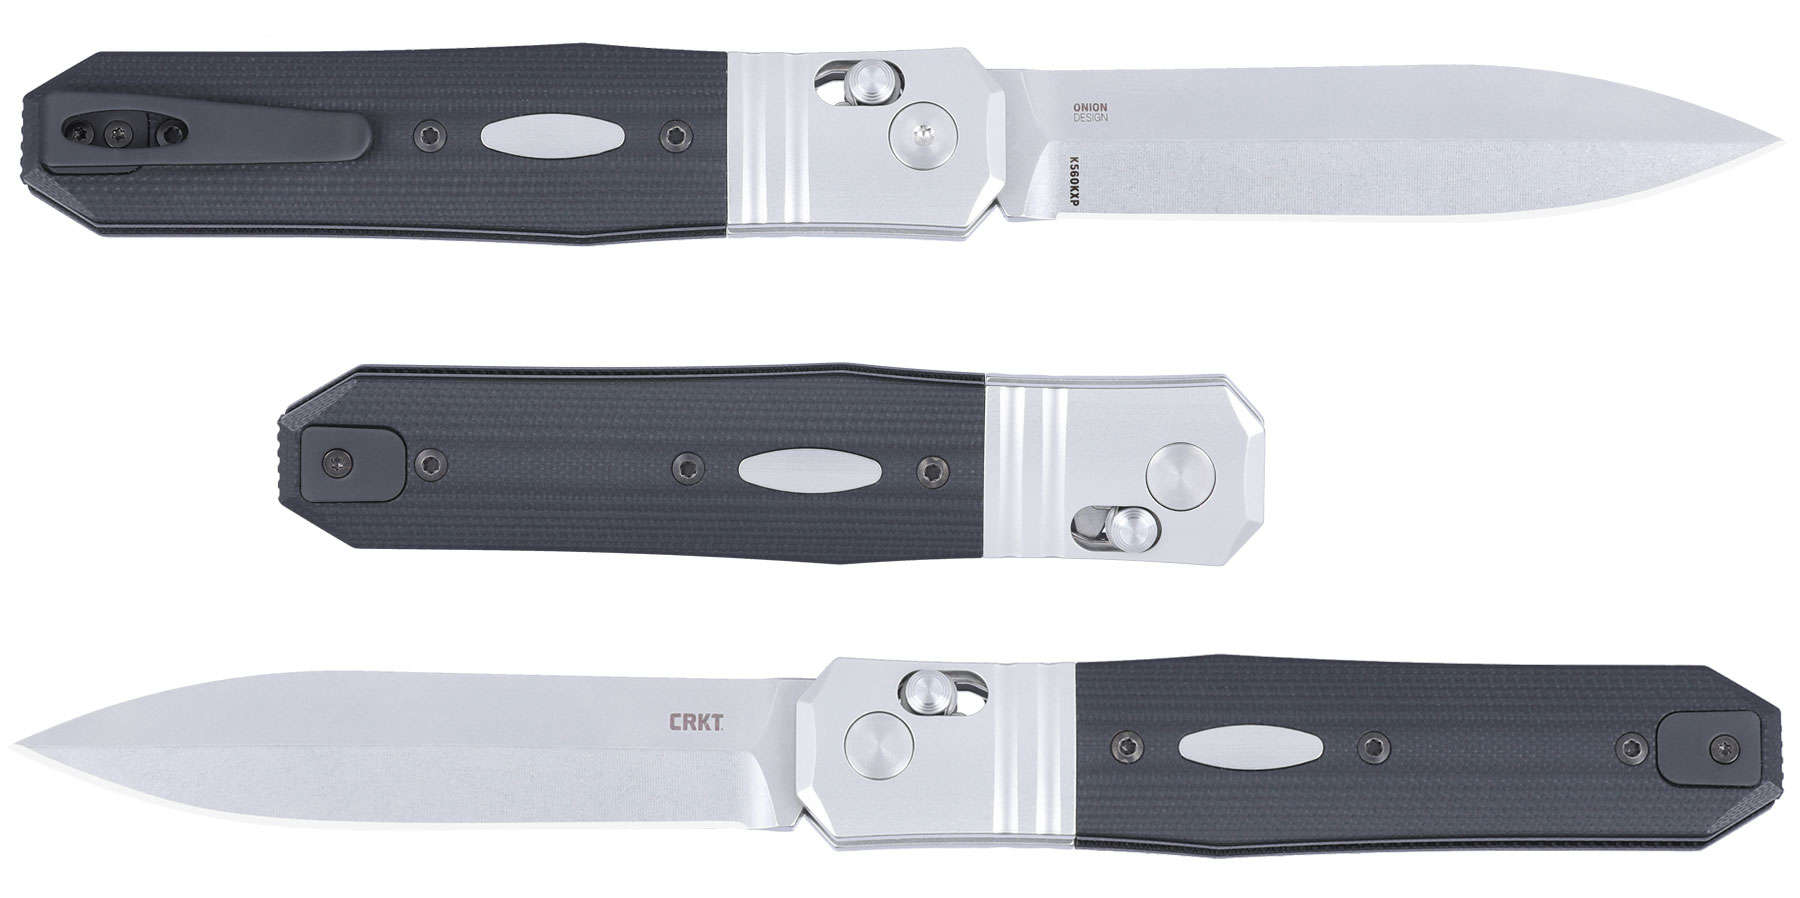 The Redemption is the latest pocket knife in CRKT's American made line-up.